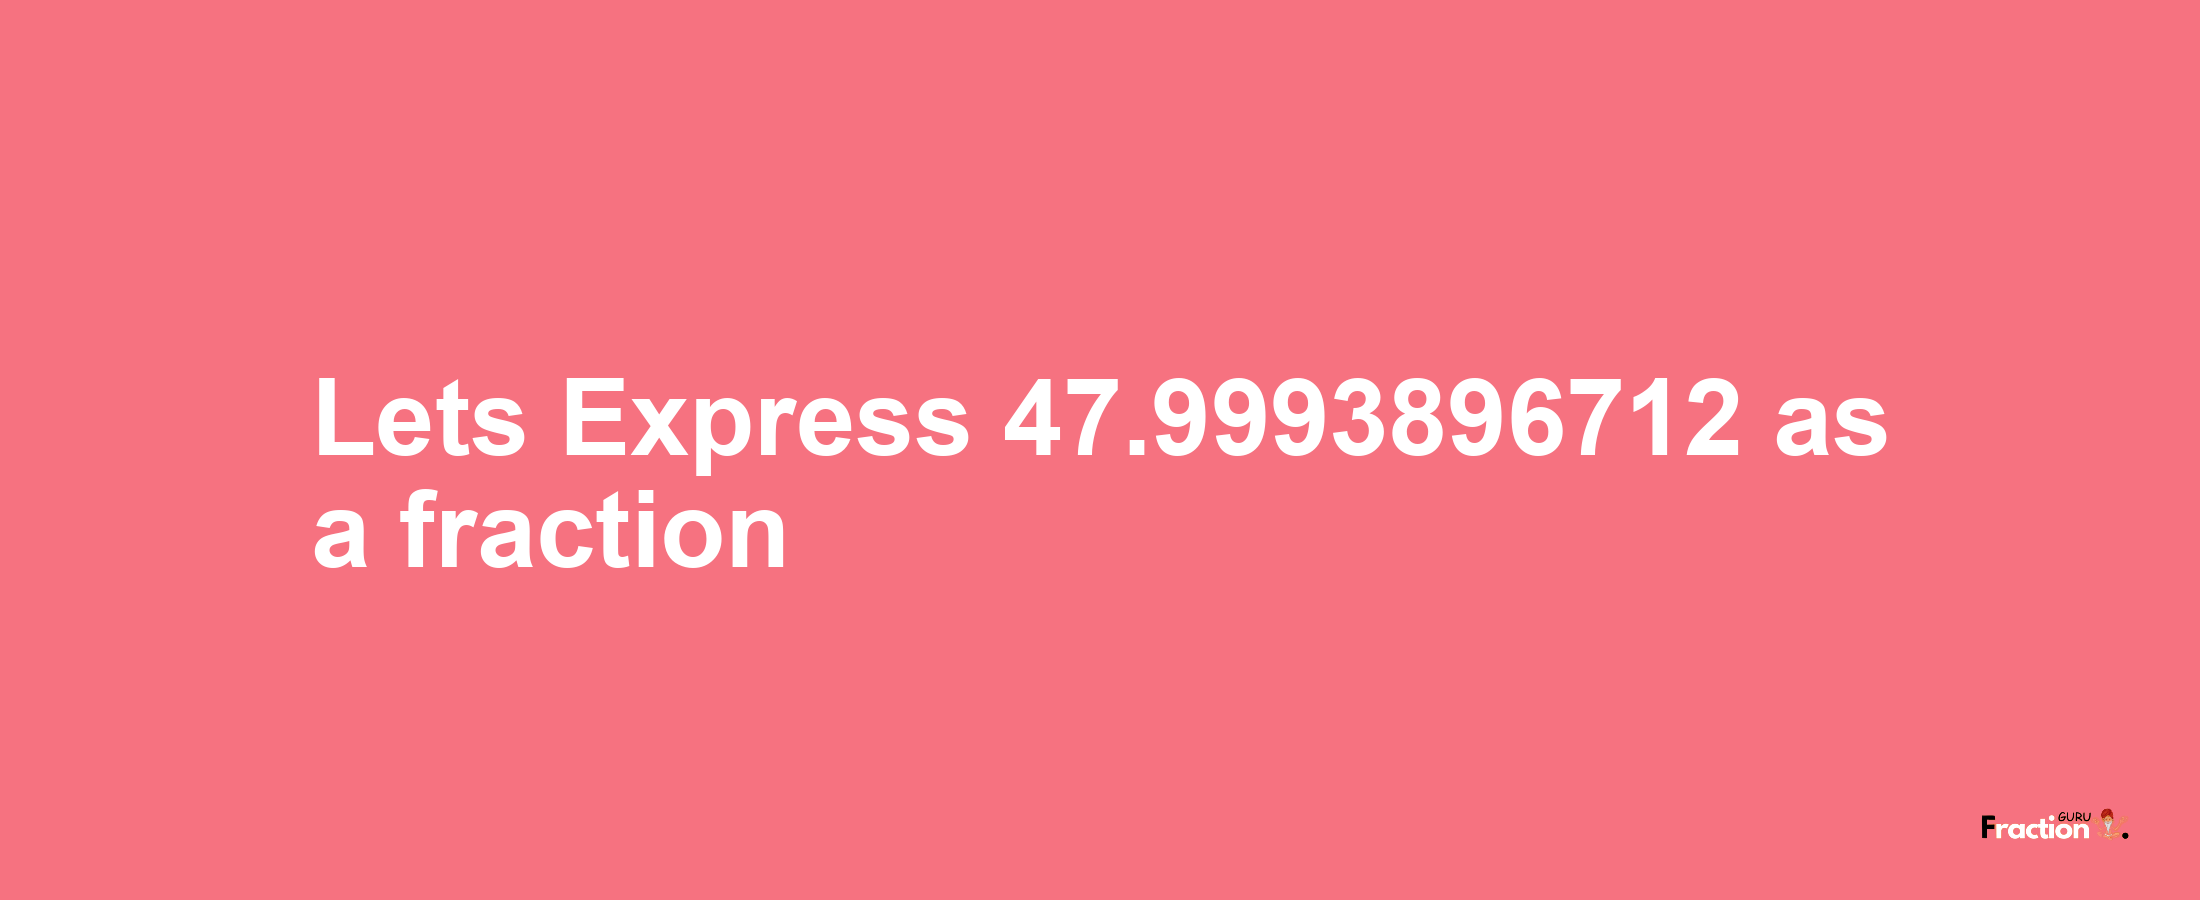 Lets Express 47.9993896712 as afraction